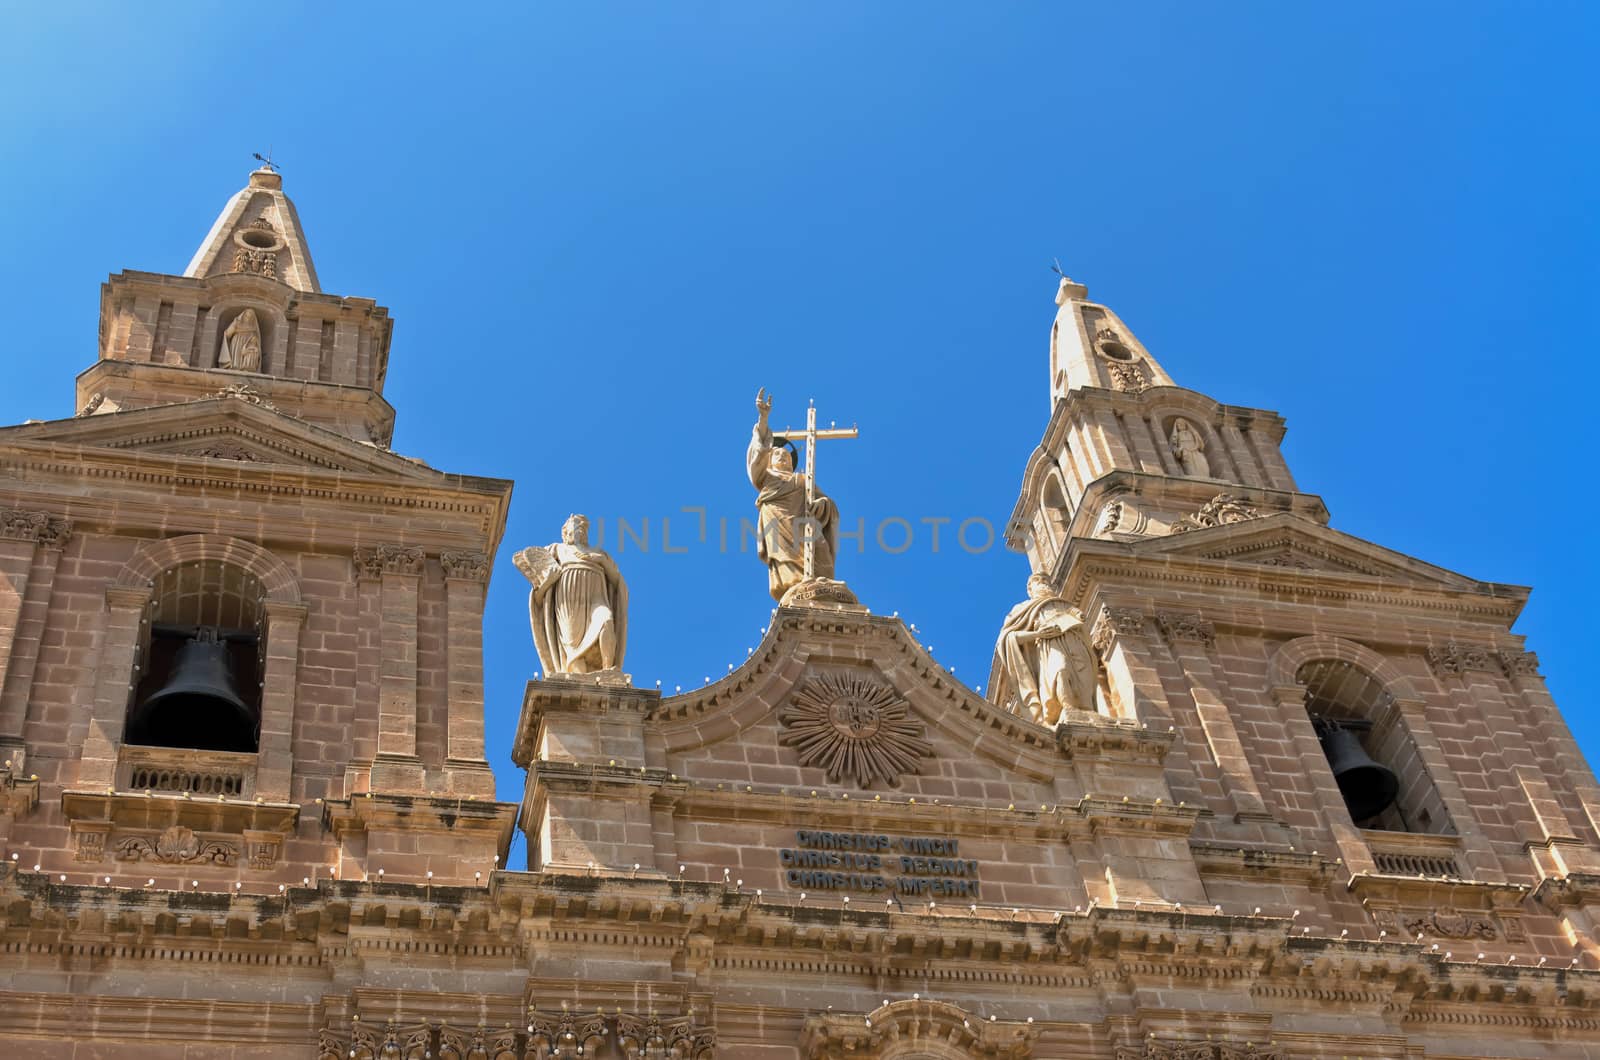 Bell towers of the Church of Our Lady of Victory – Mellieha, Malta.